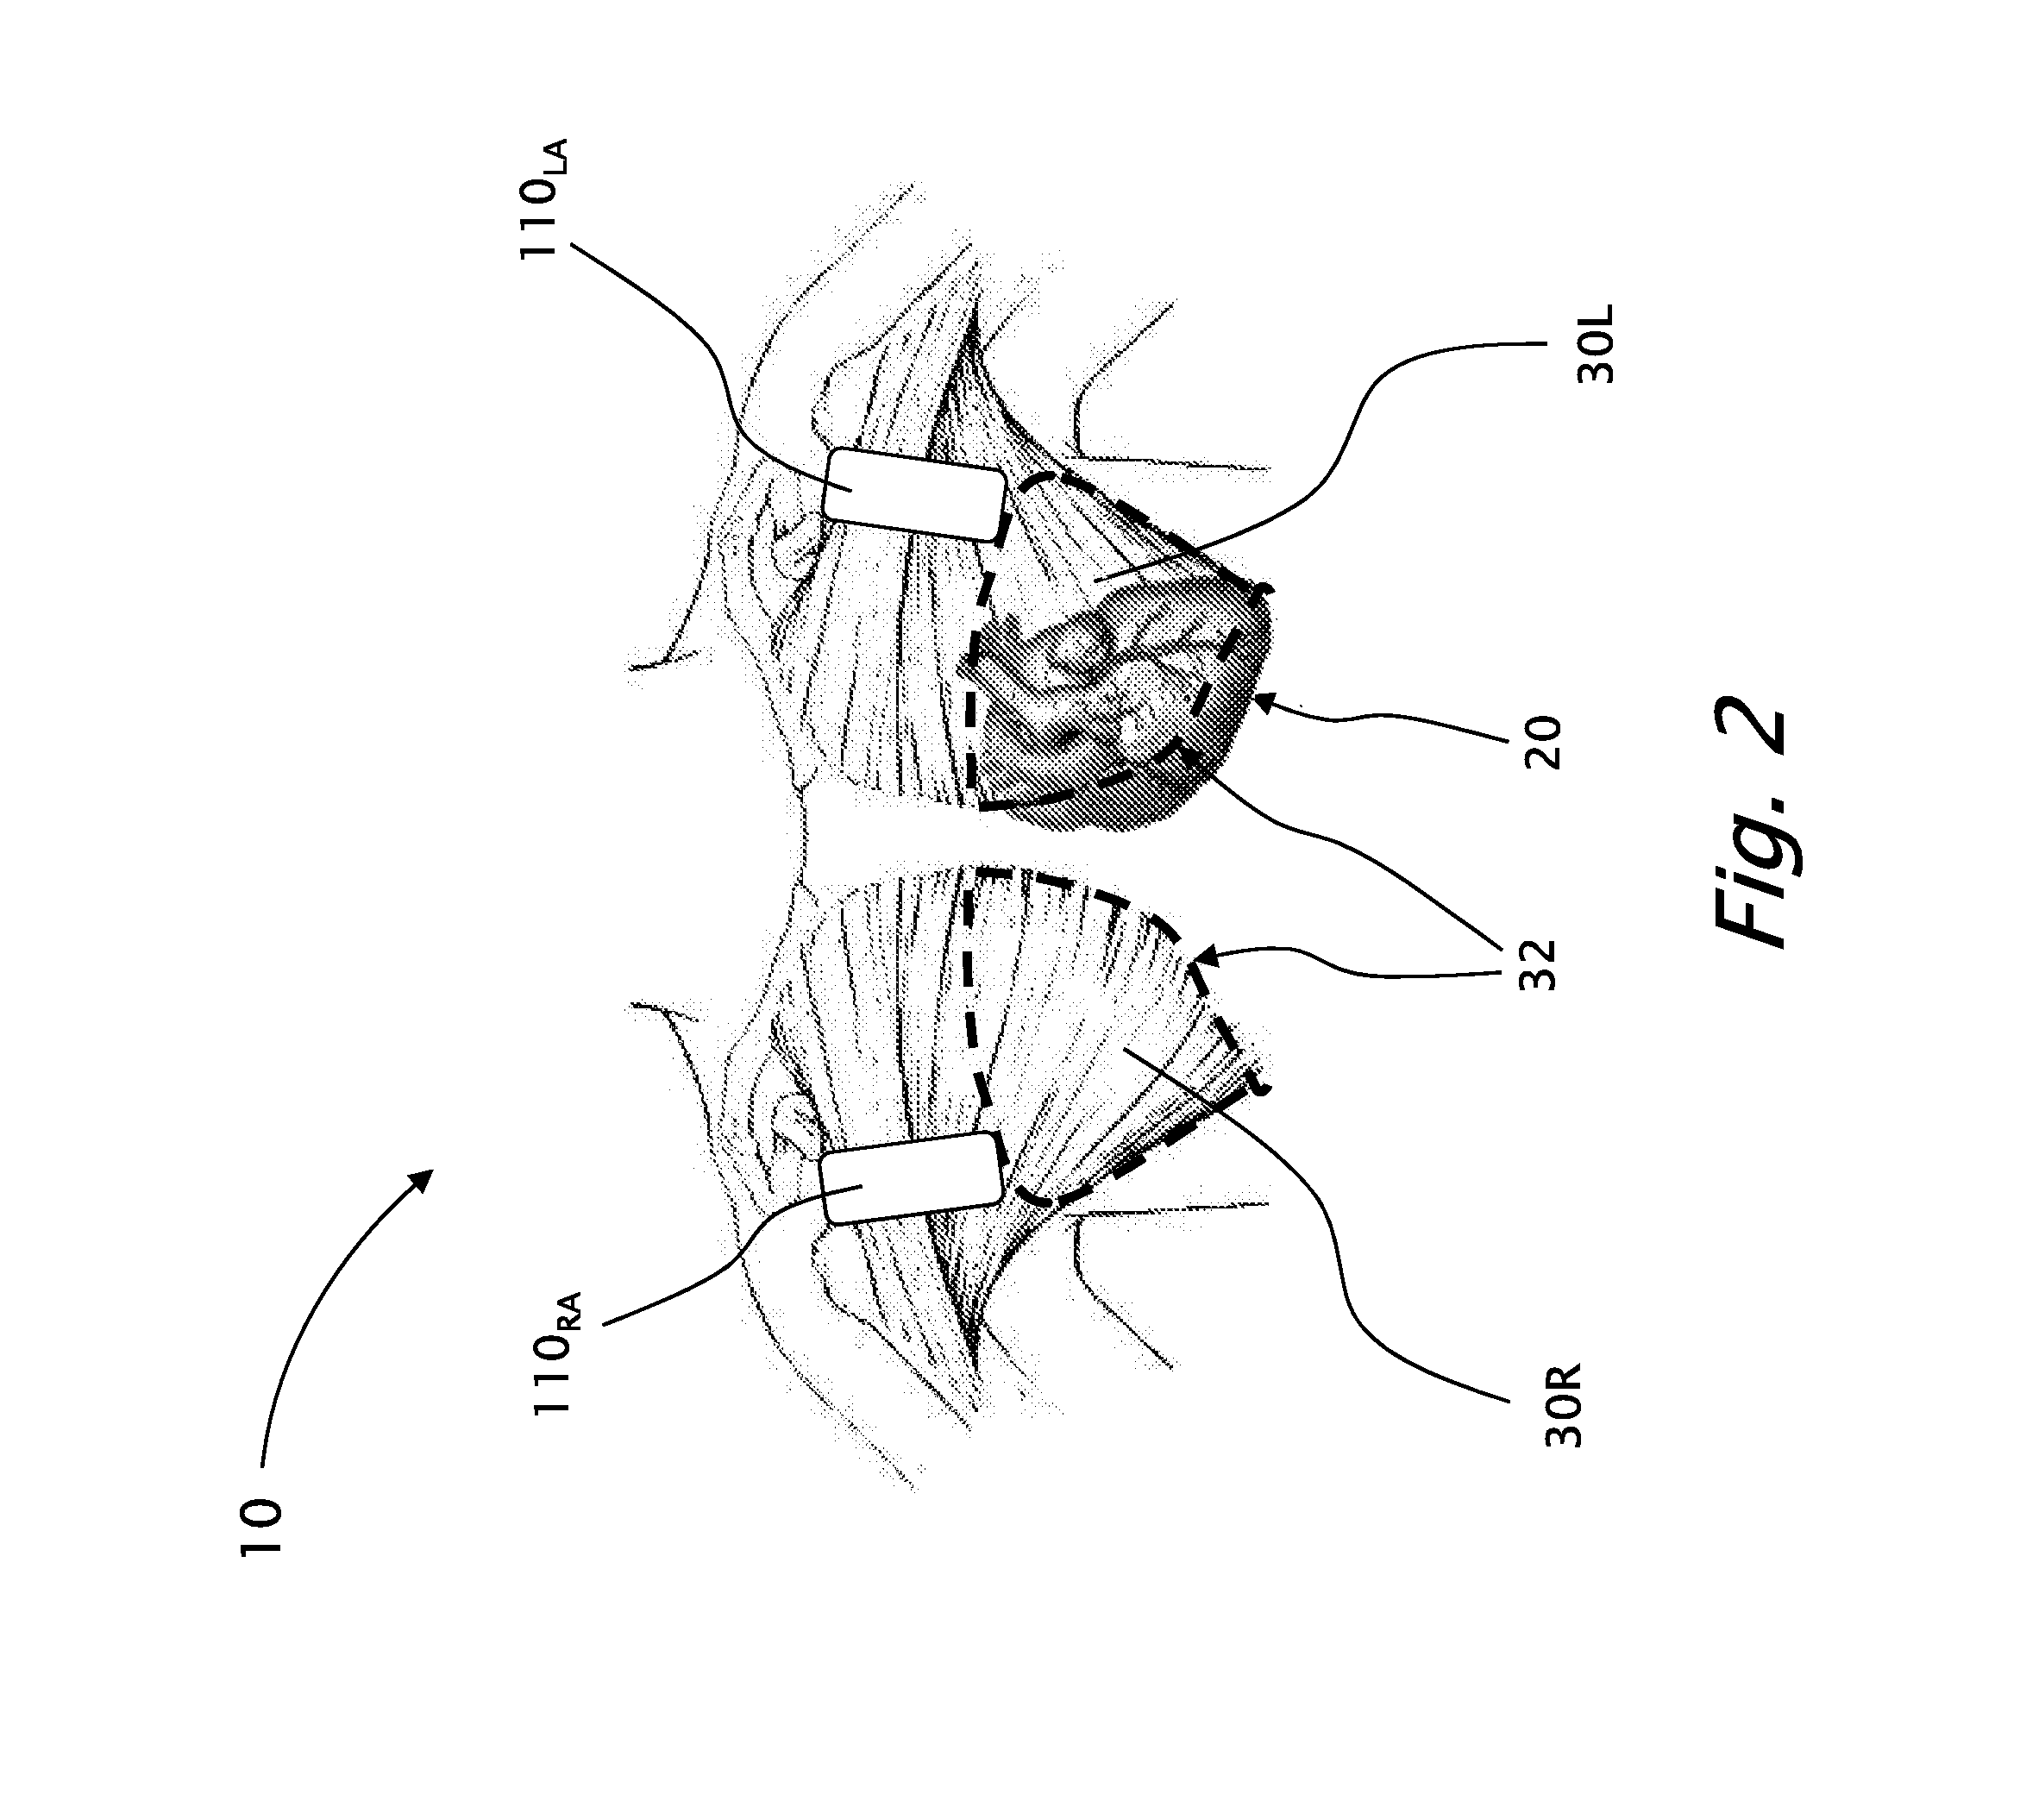 Devices and methods for obtaining workable ECG signals using dry knitted electrodes